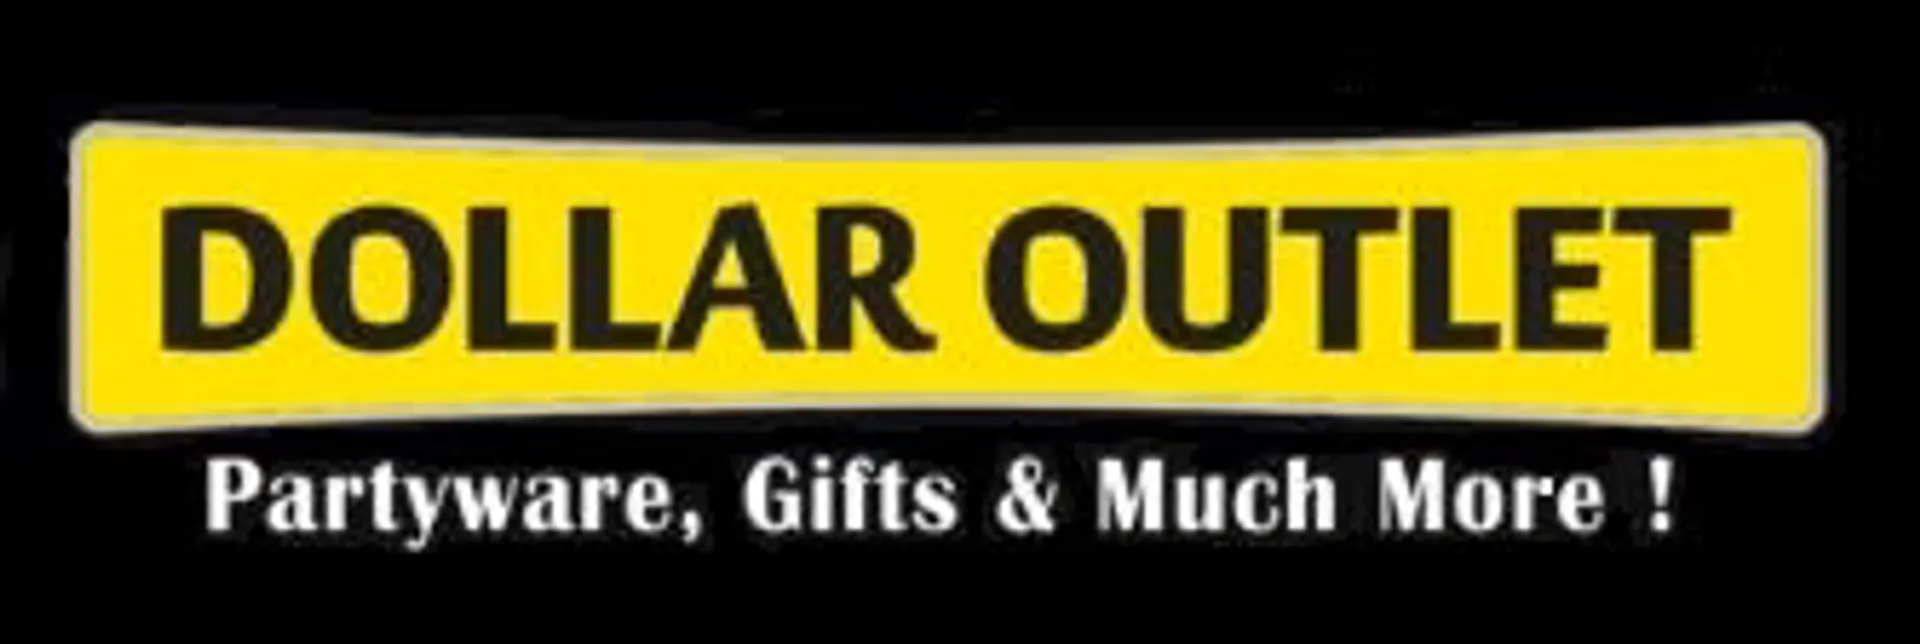 DOLLAR OUTLET logo current weekly ad